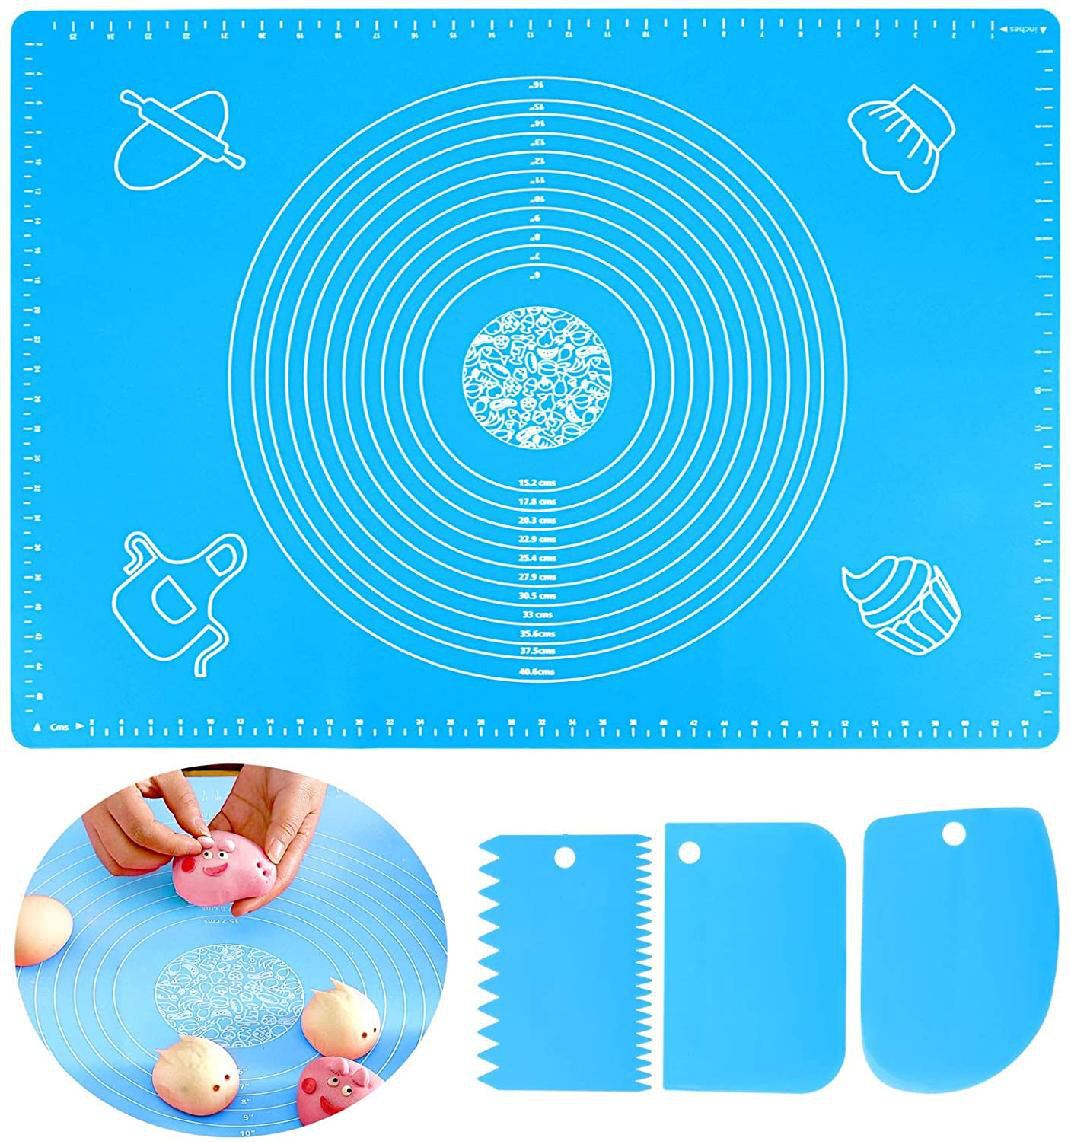 Silicone Baking Mats,Non Stick & Non Slip Baking Pastry Mat for Rolling Out Dough,Reusable,Heat Resistant,BPA Free,Non-Toxic,Easy to Clean With Measurements-Blue 